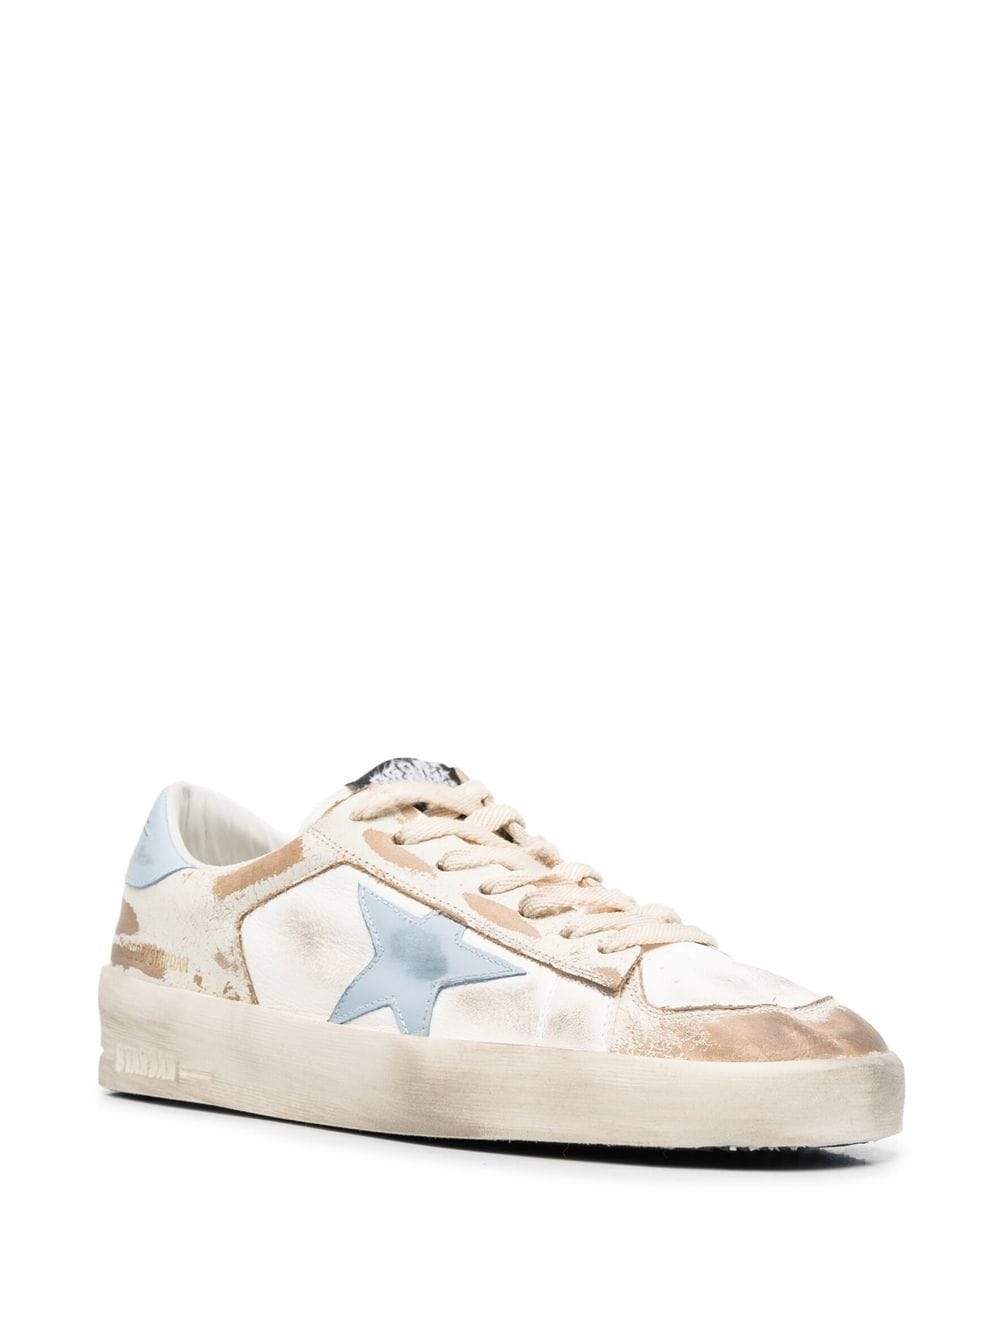 golden goose deluxe brand star patch sneakers - white